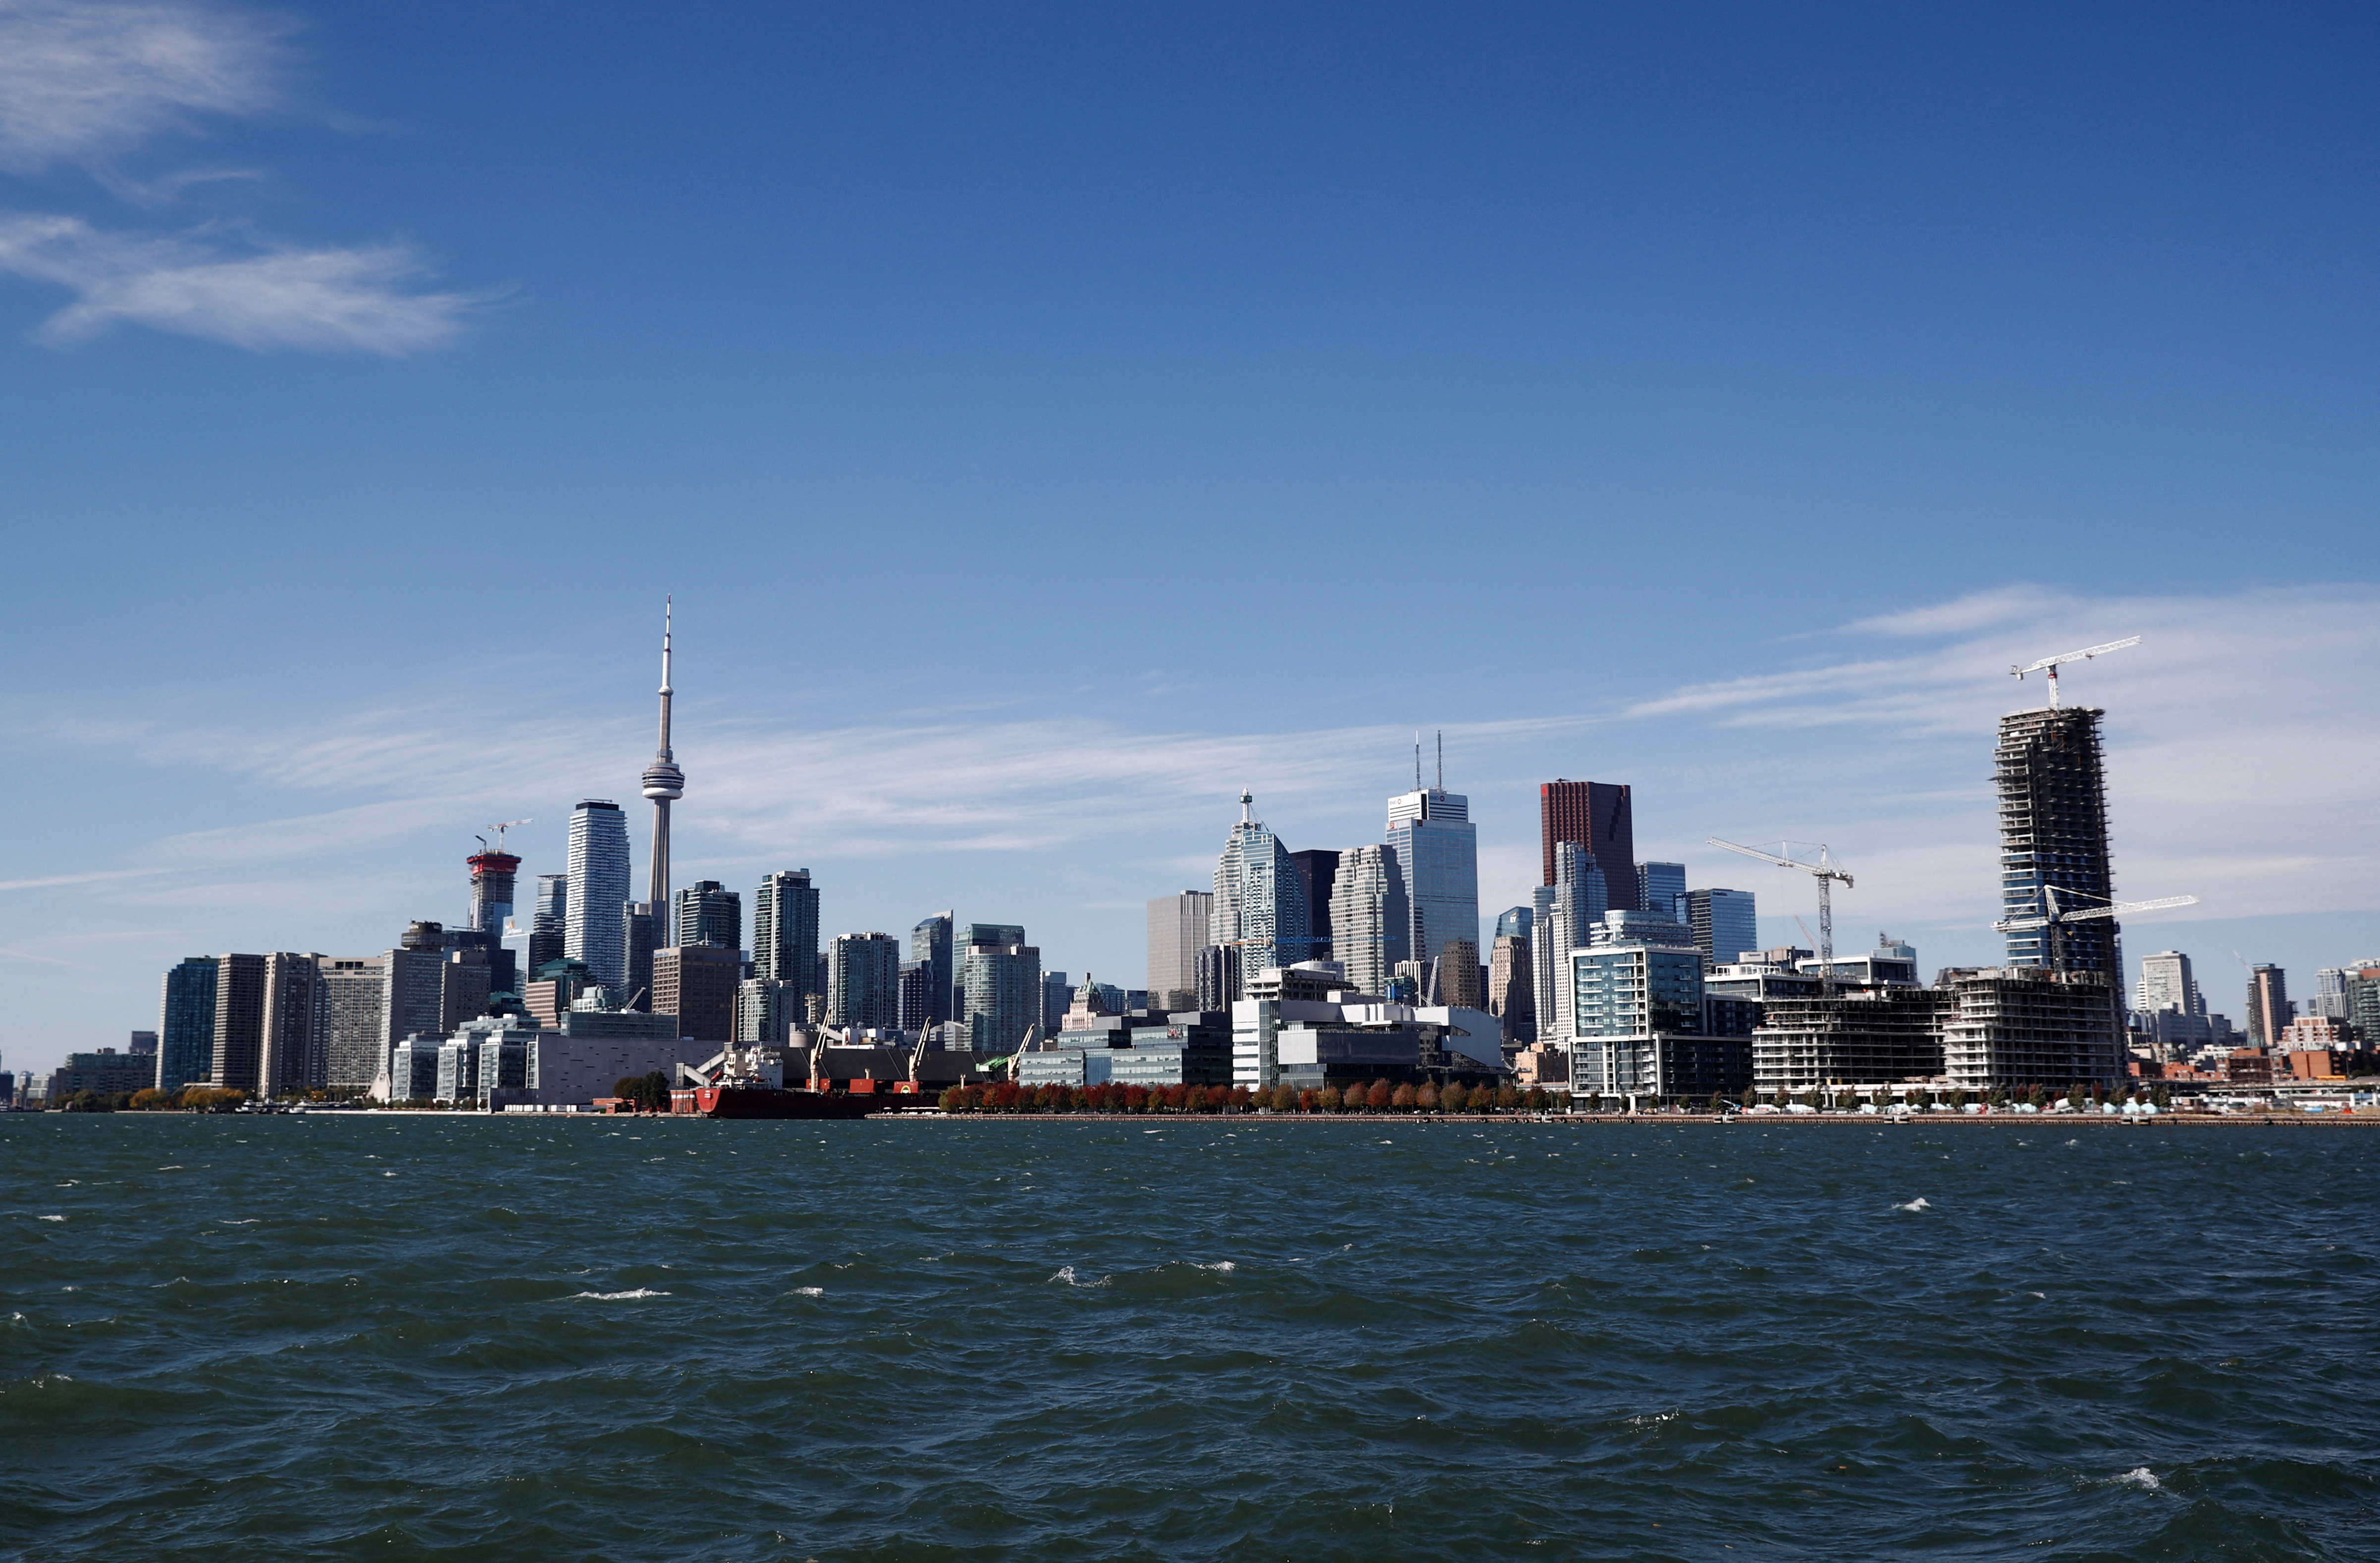 Toronto skyline stands on the waterfront before Alphabet Inc, the owner of Google, announced the project "Sidewalk Toronto\